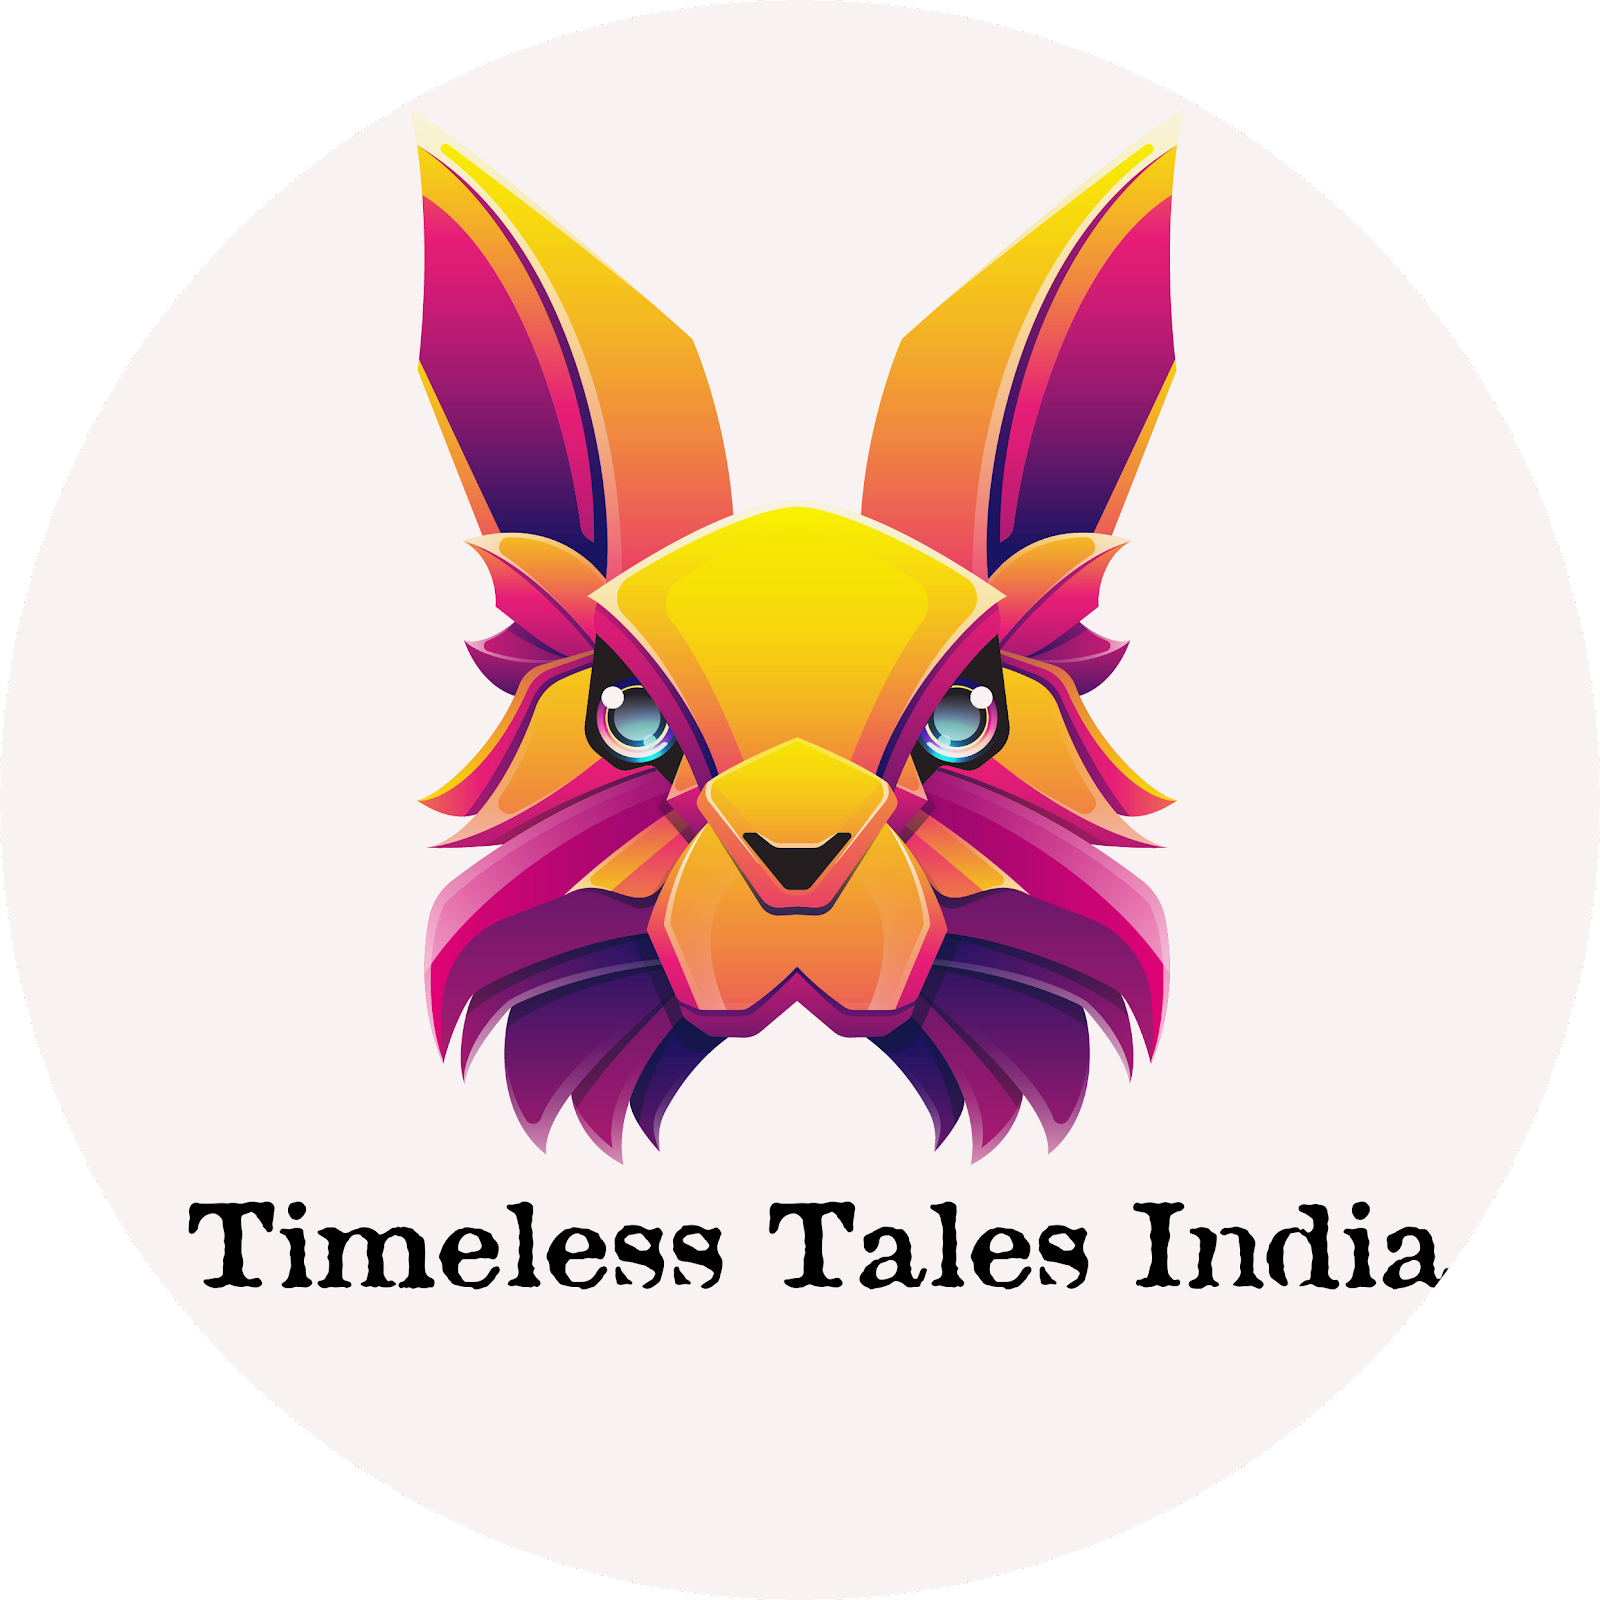 Timeless Tales India